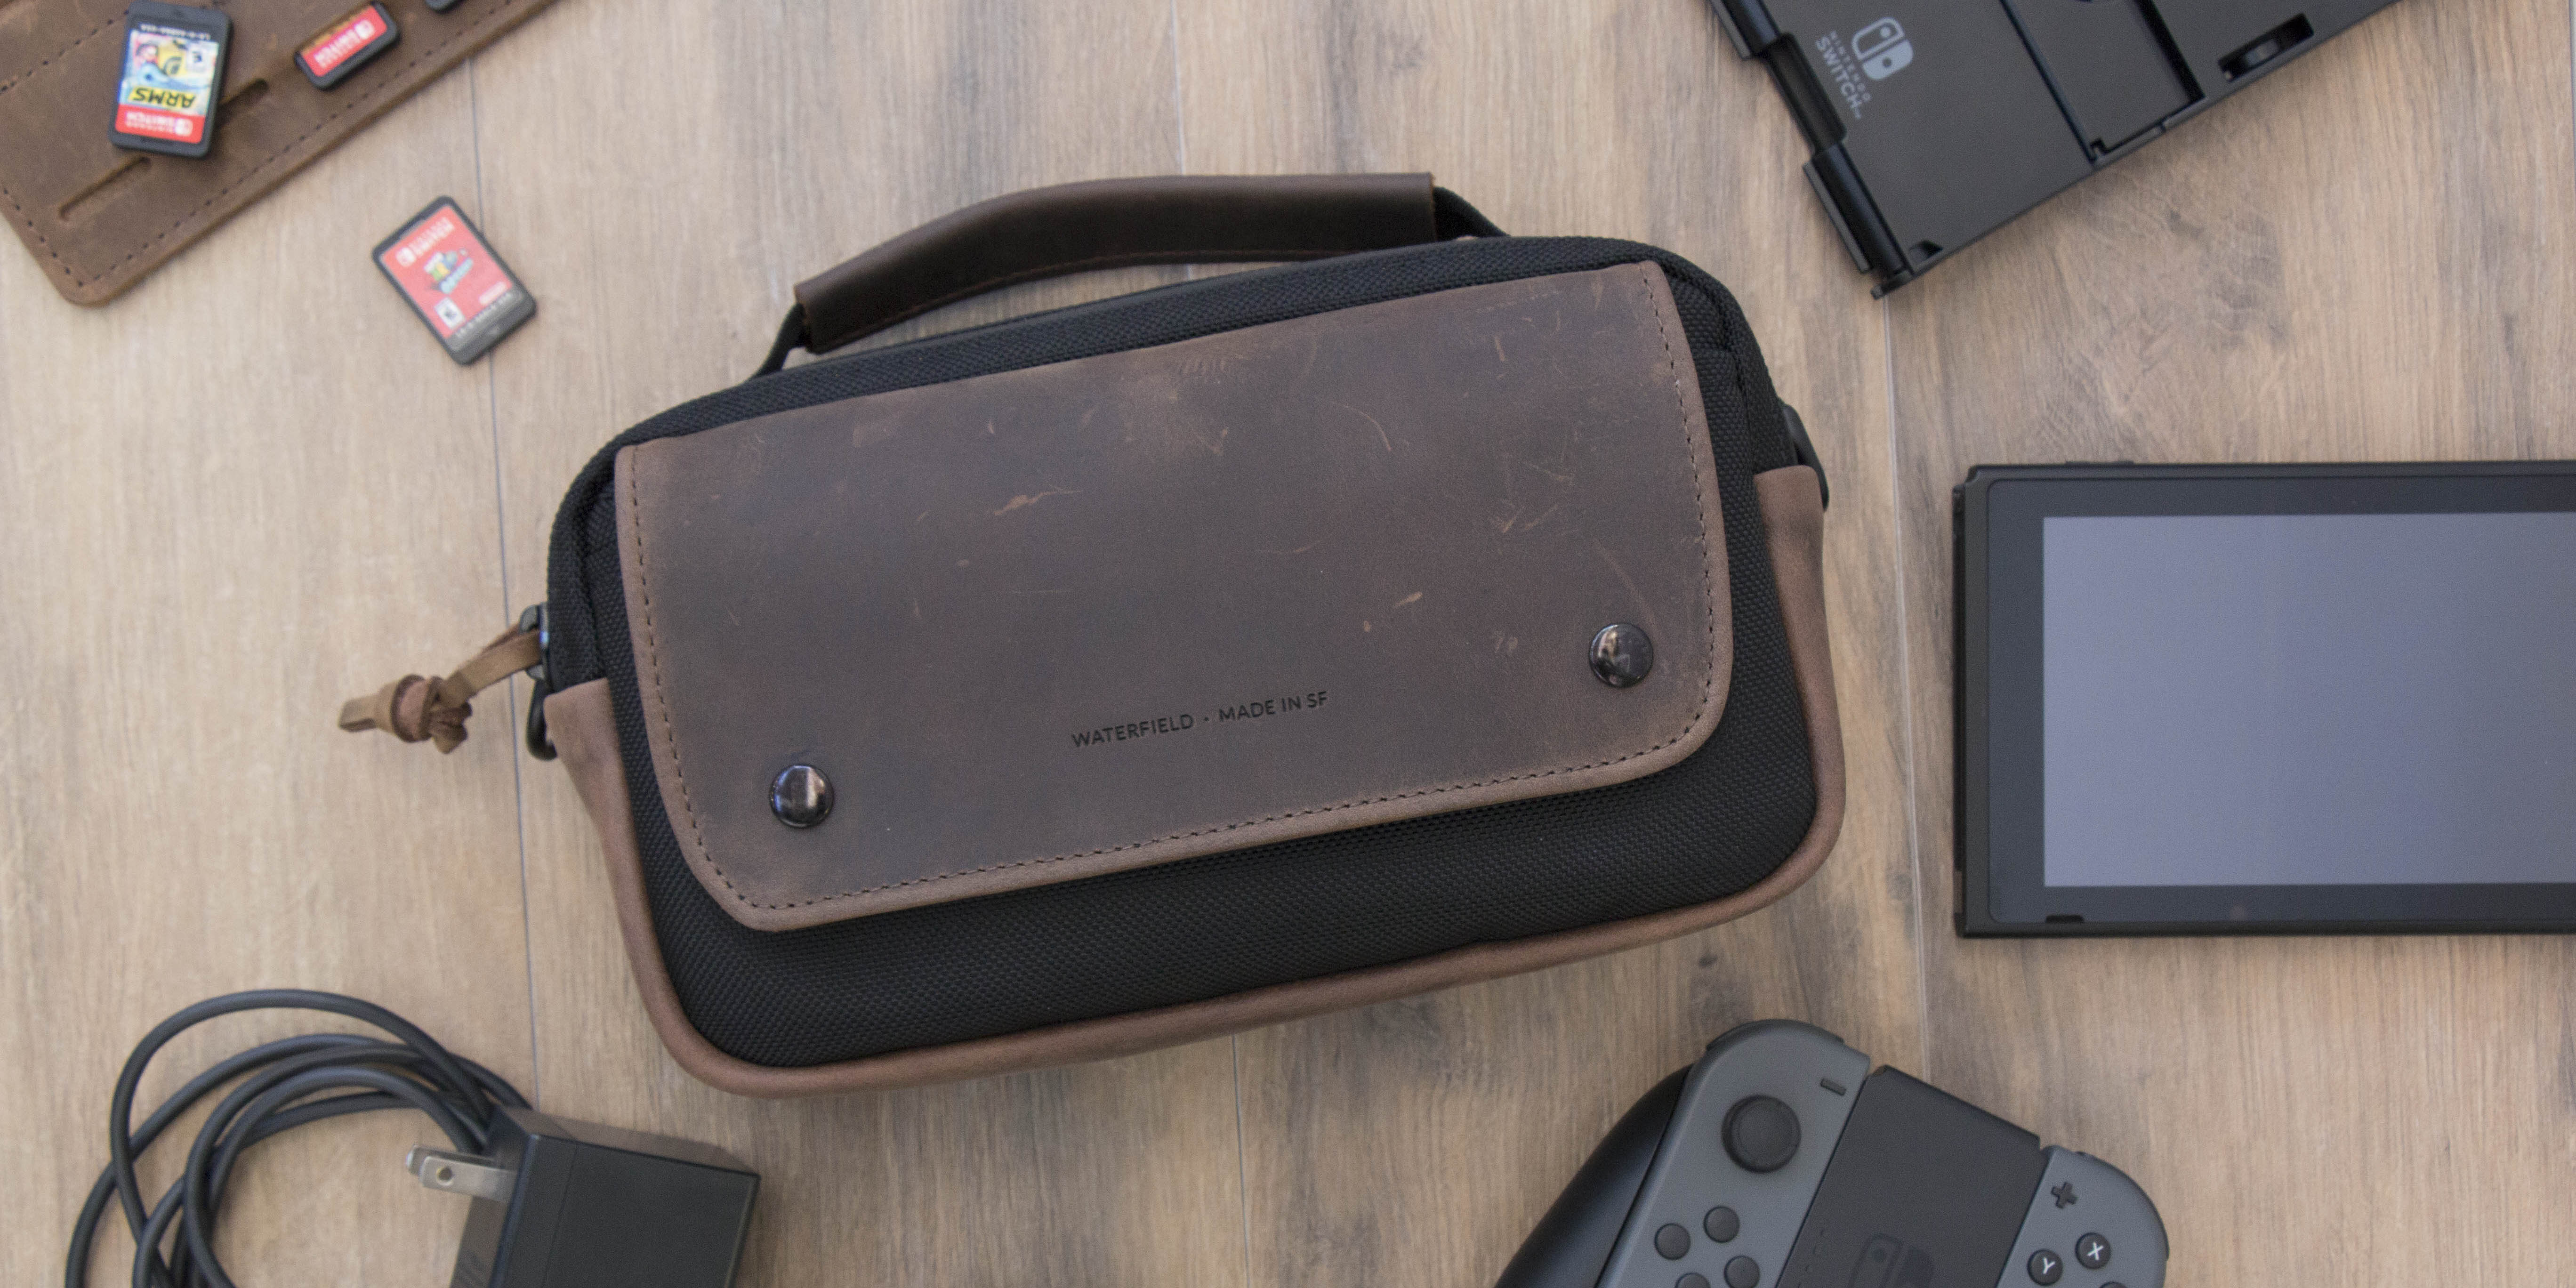 WaterField's new Nintendo Switch case fits all your accessories in a compact carrier